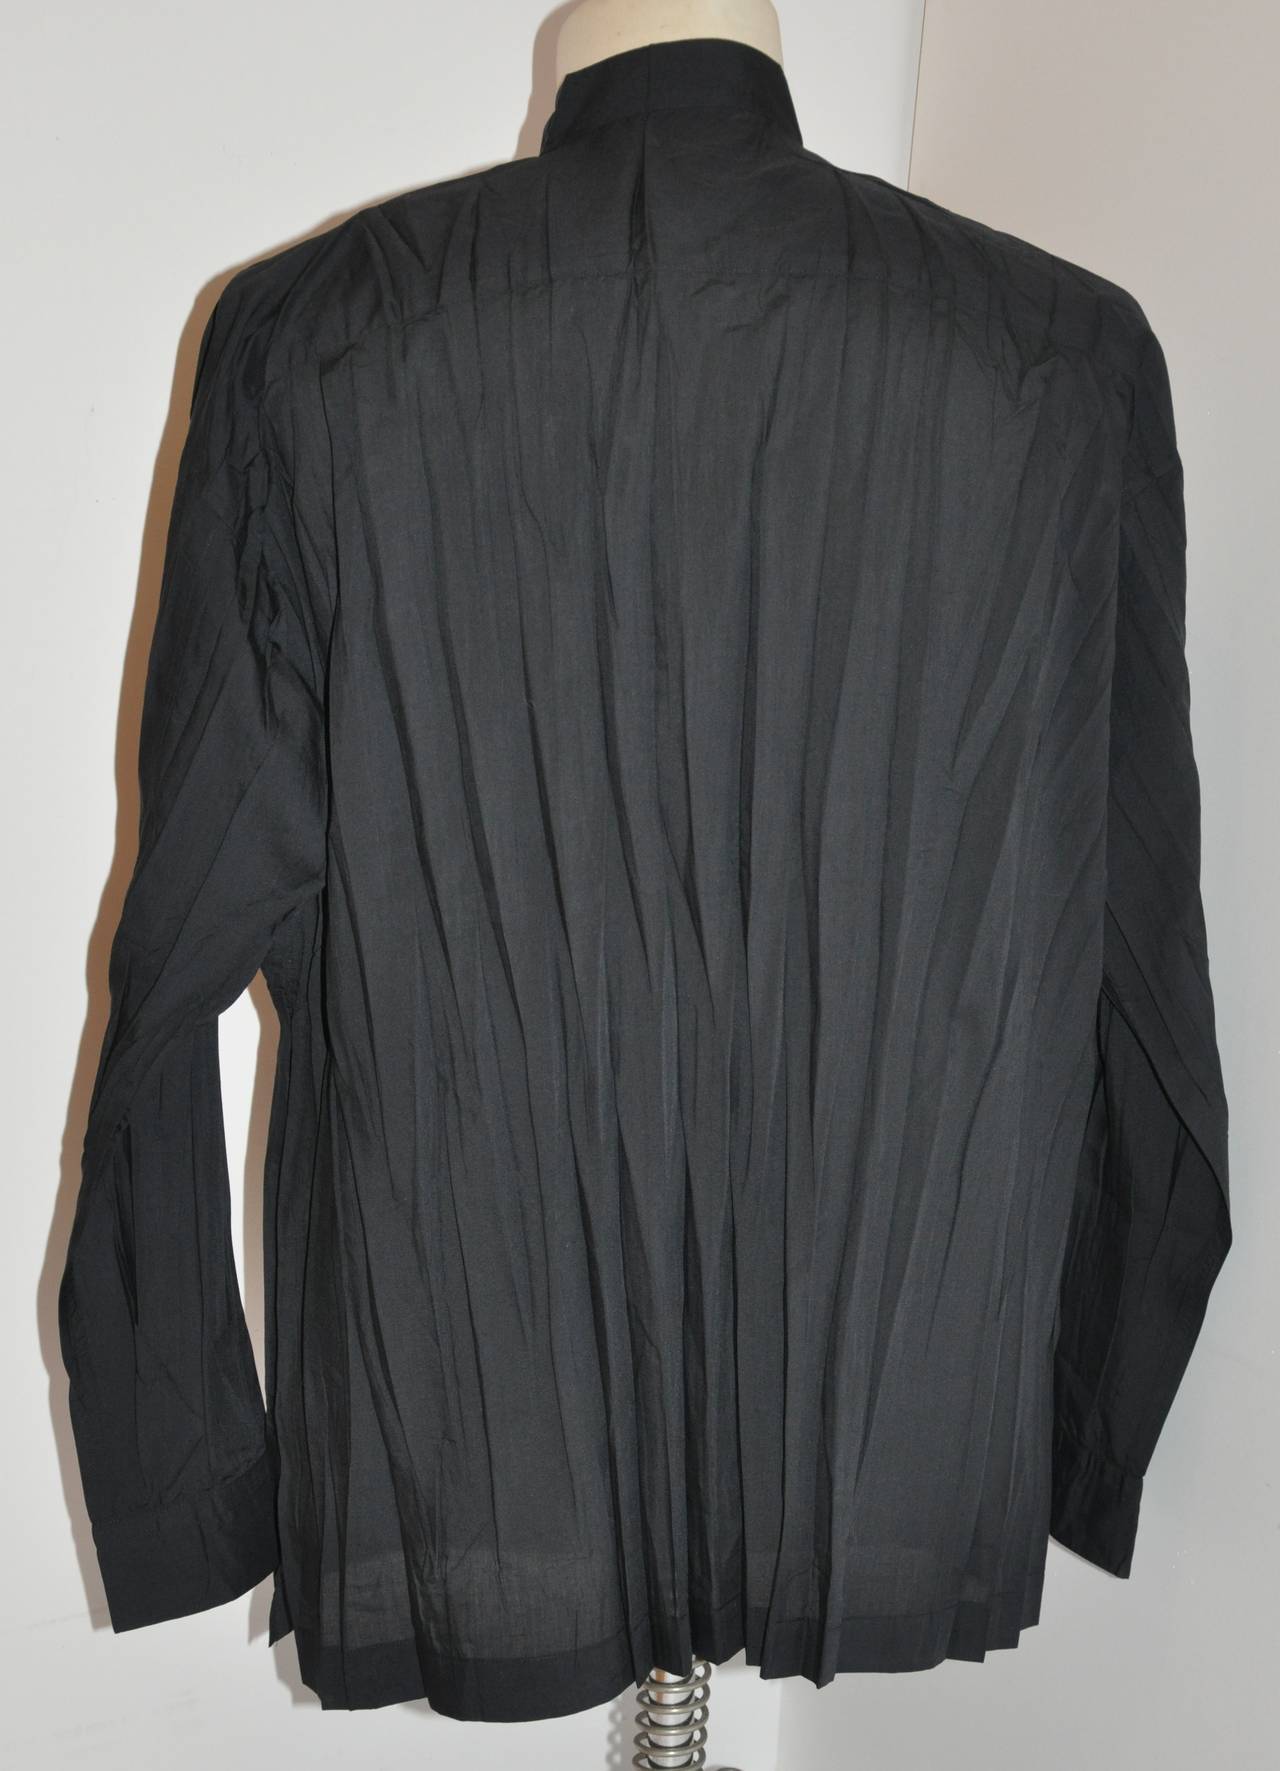 This wonderfully comfortable Issey Miyake men's accordian button down shirt is accented with seven(7) mother-of-pearl buttons on the front of the shirt as well as on the sleeve's cuffs and front breast pocket. The shirt also has two side slits which